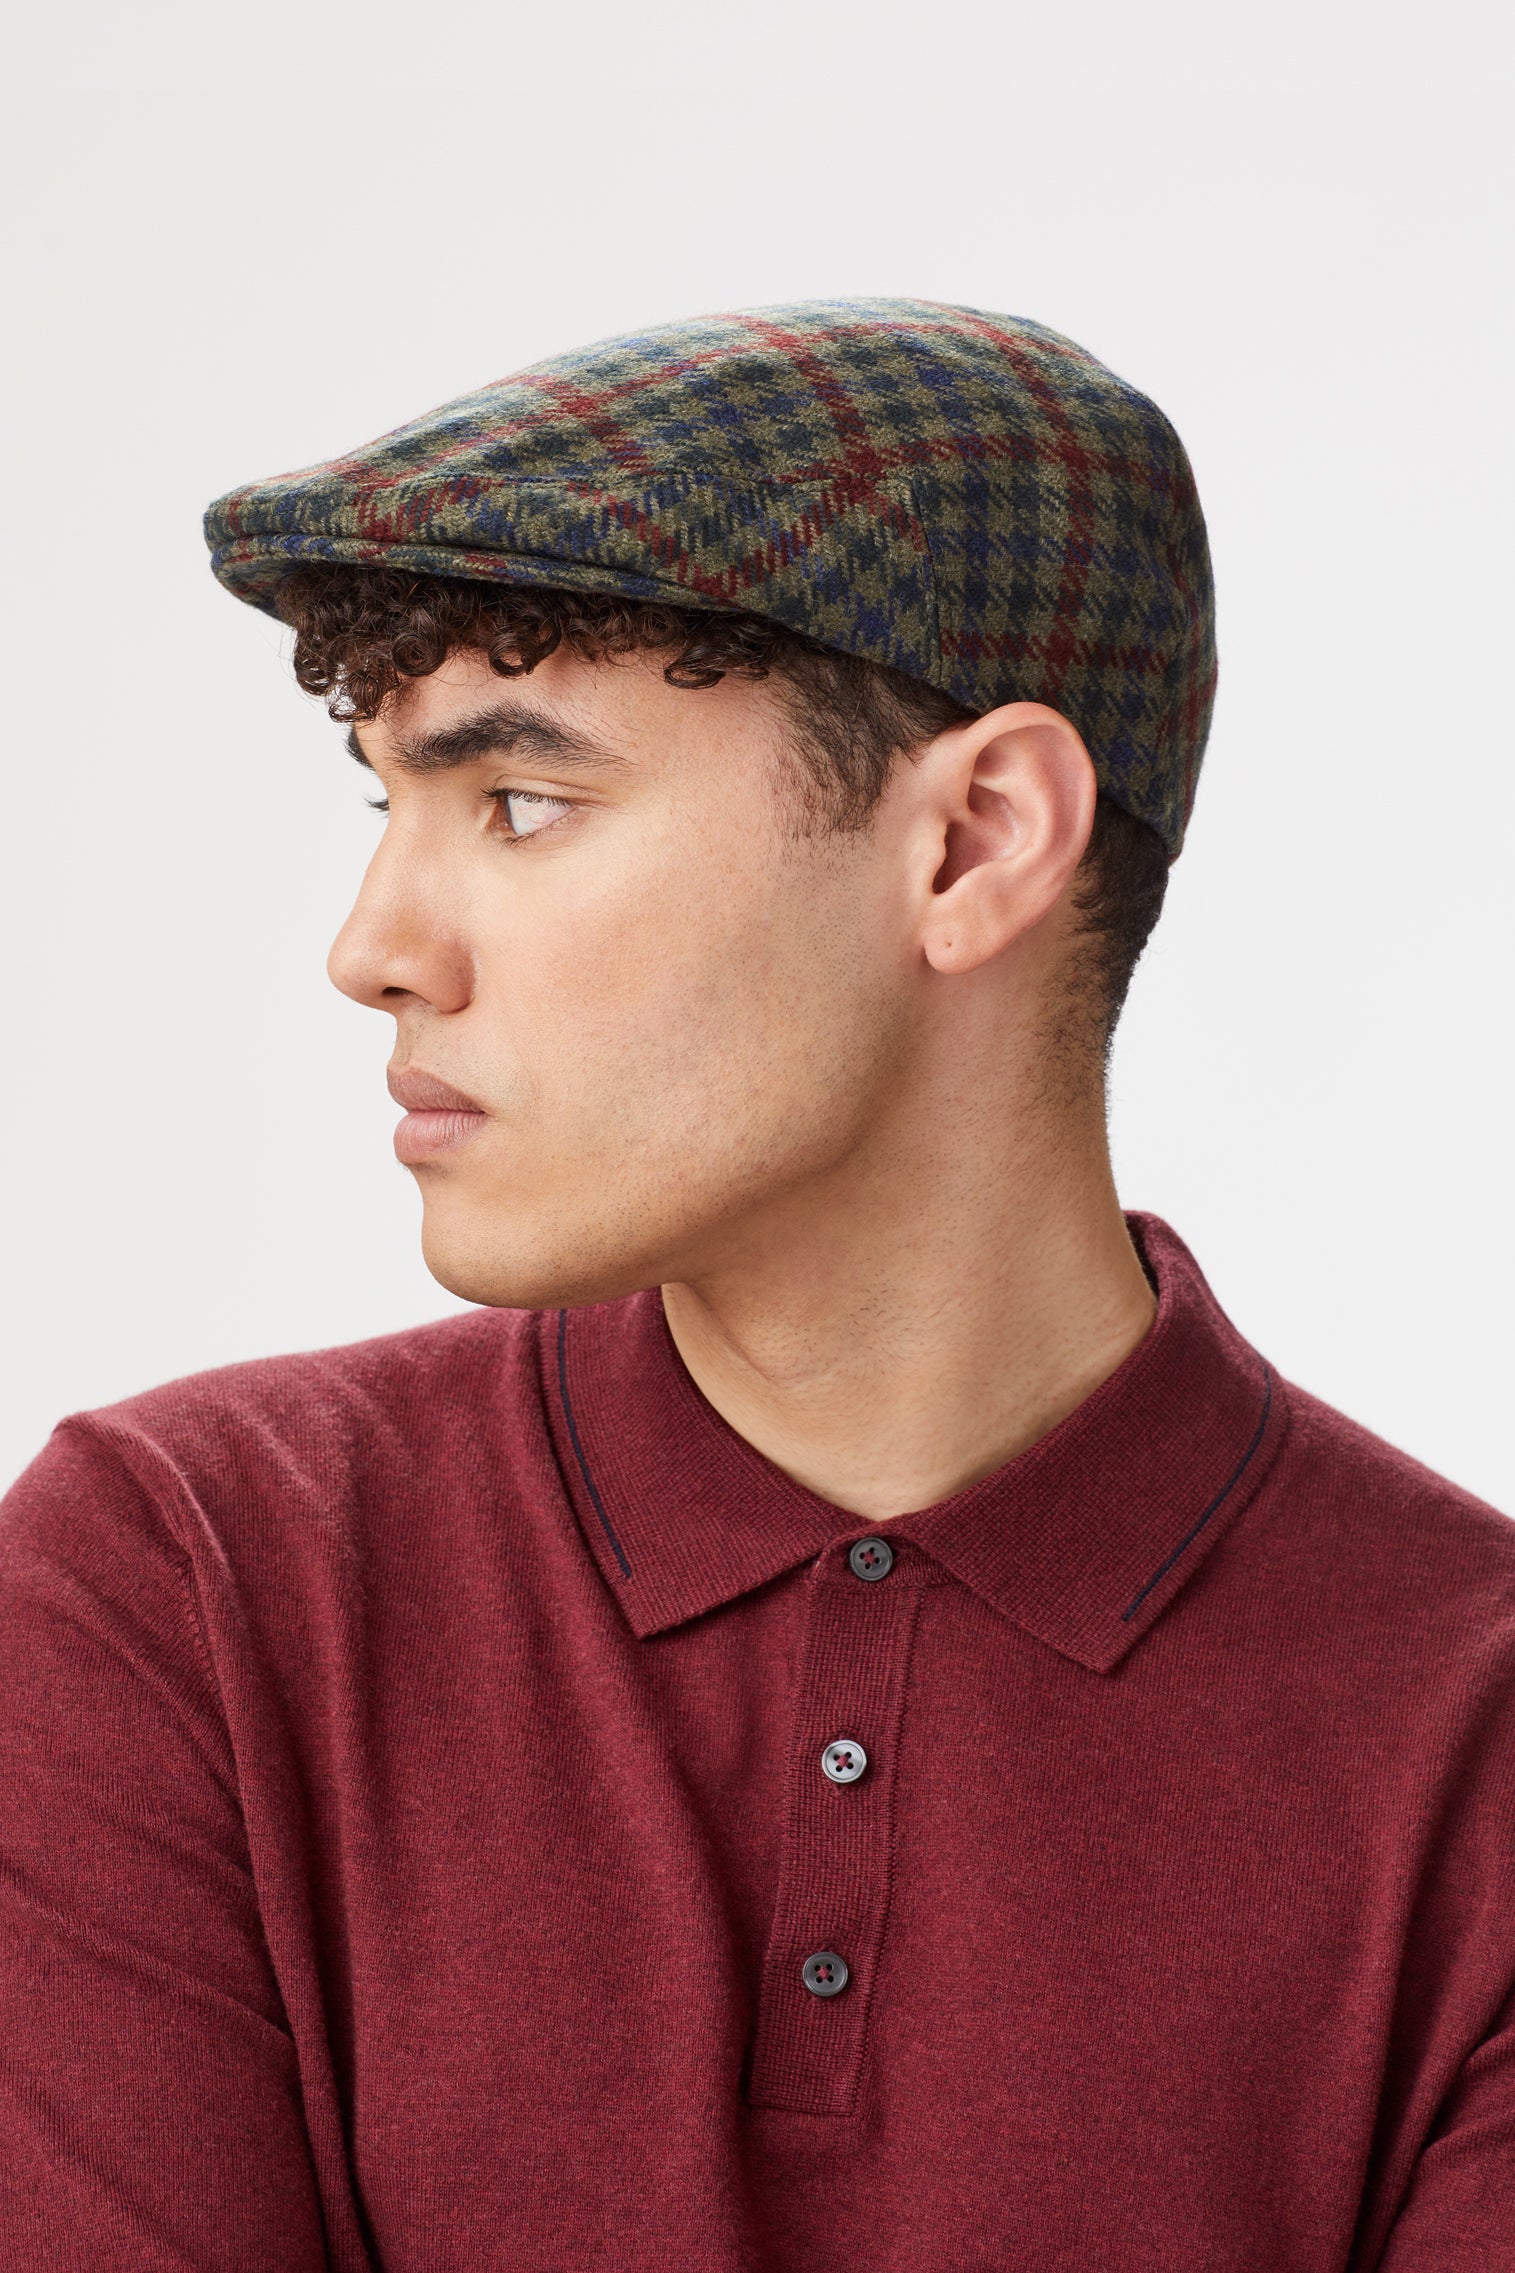 Gill Cashmere Flat Cap - All Ready to Wear - Lock & Co. Hatters London UK